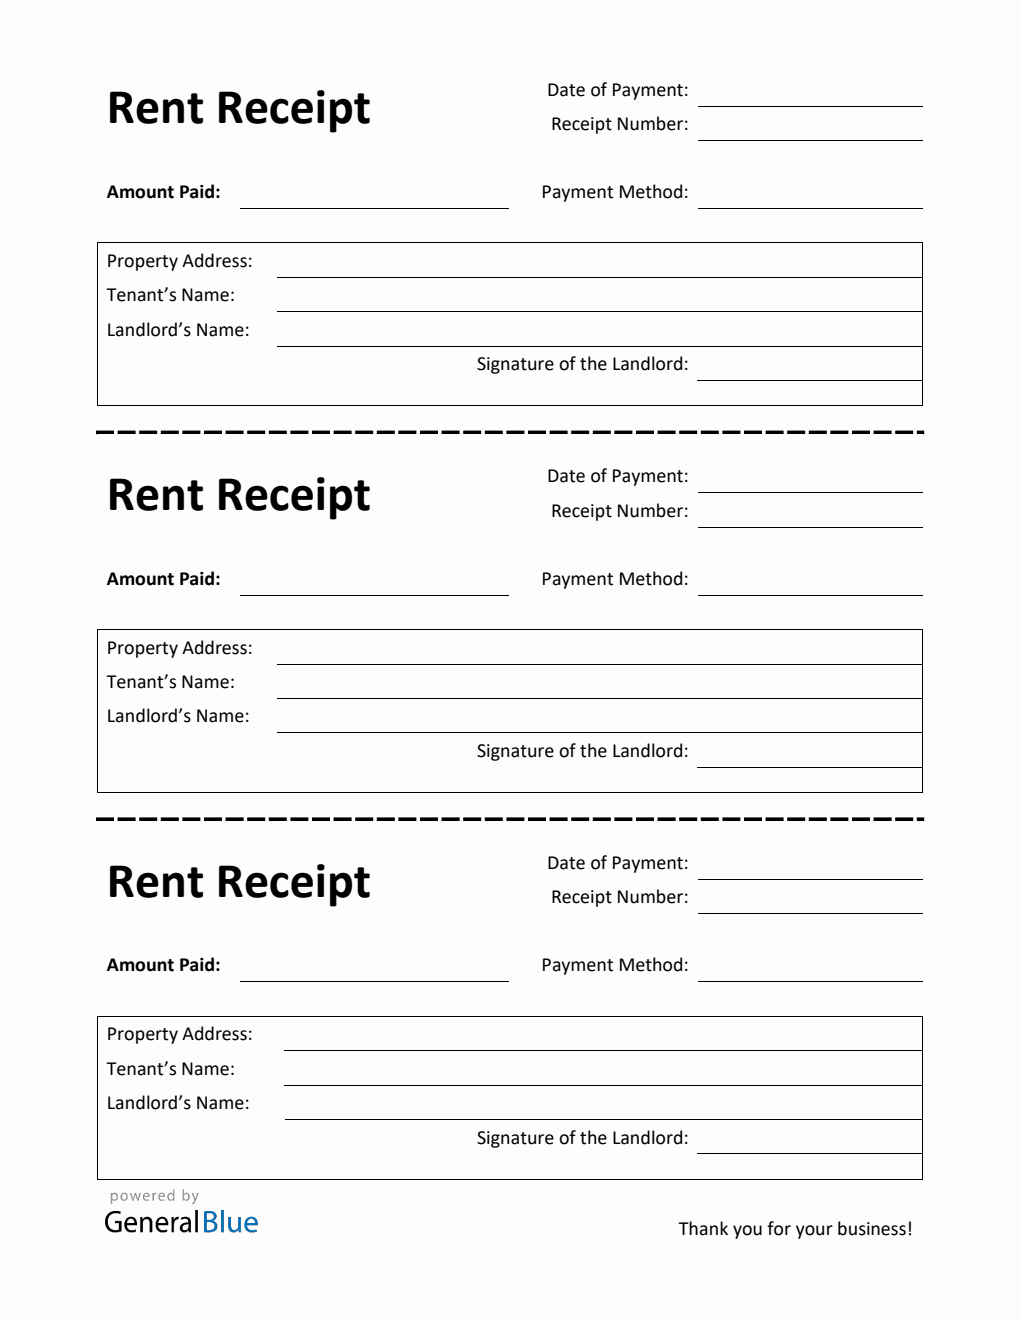 printable-rent-receipt-template-in-word